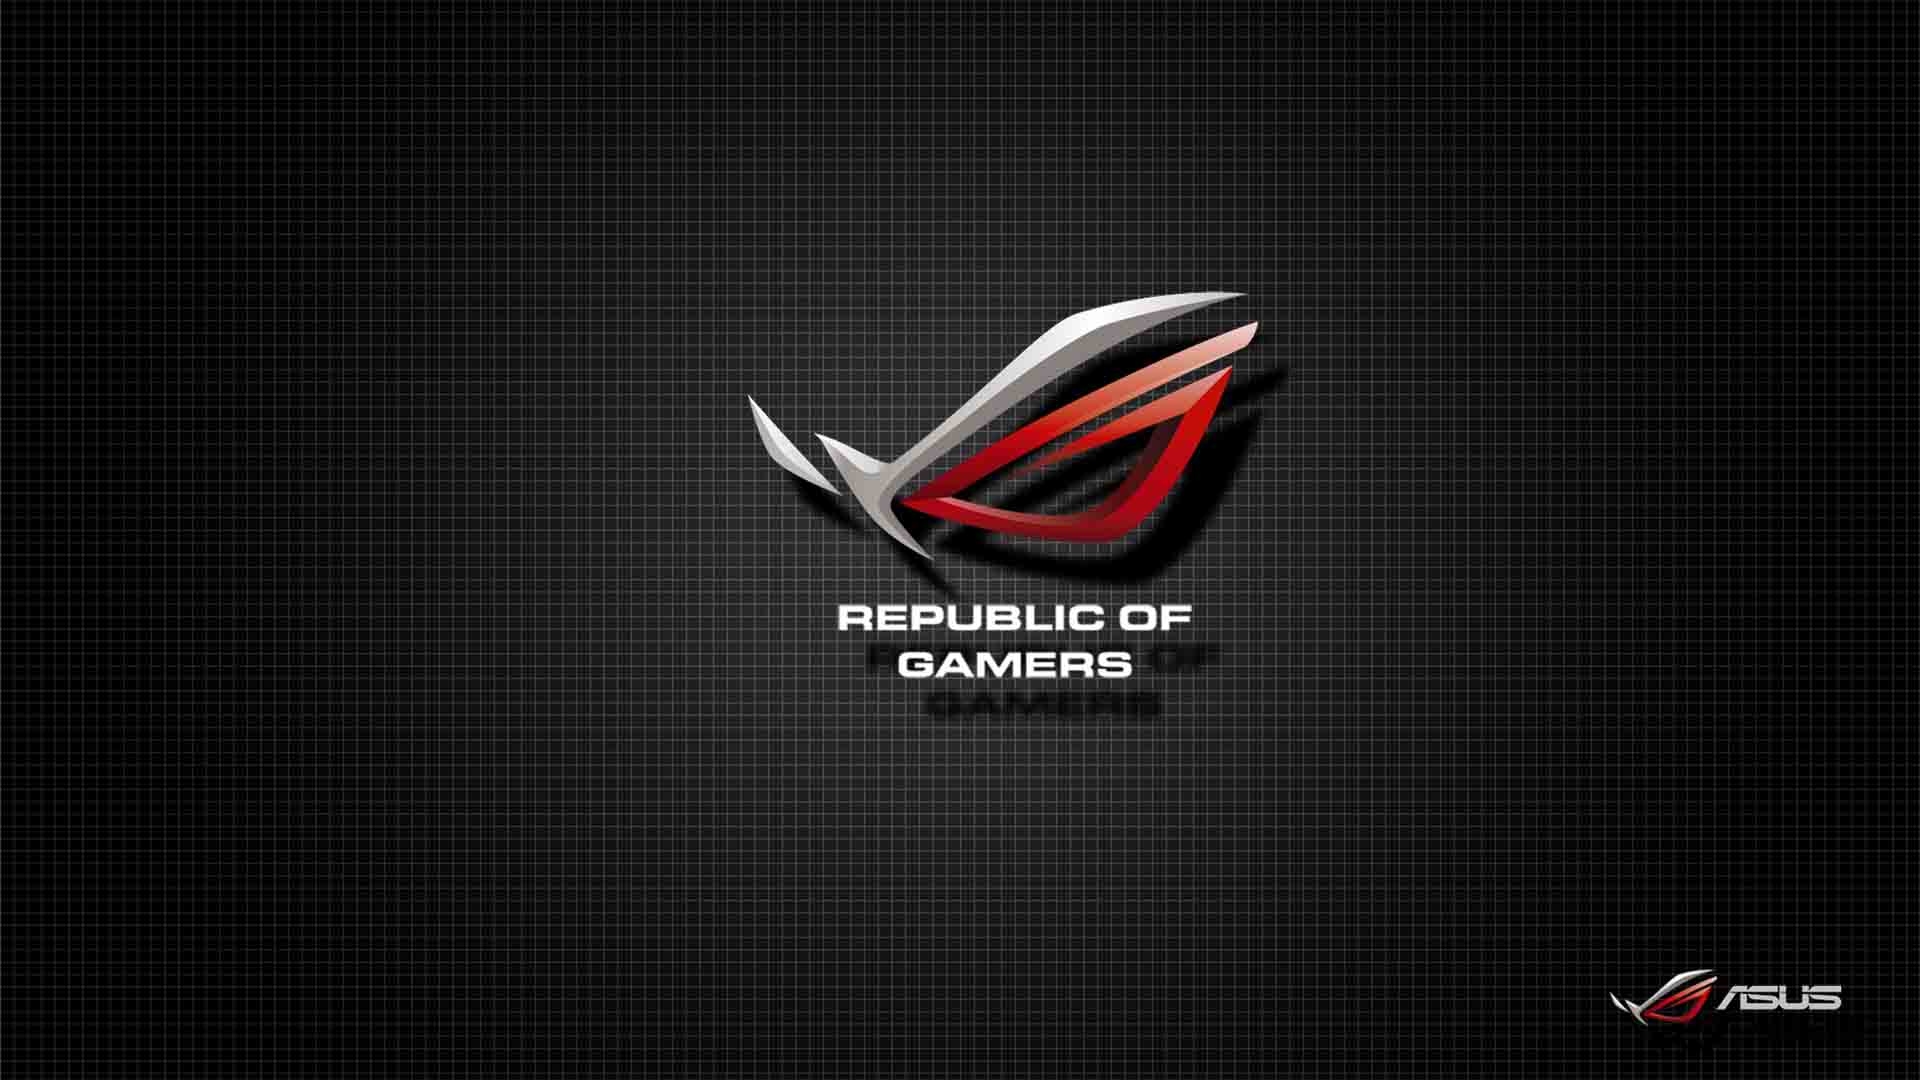 With Awesome 4k Rog Wallpaper Republic Of Gamers